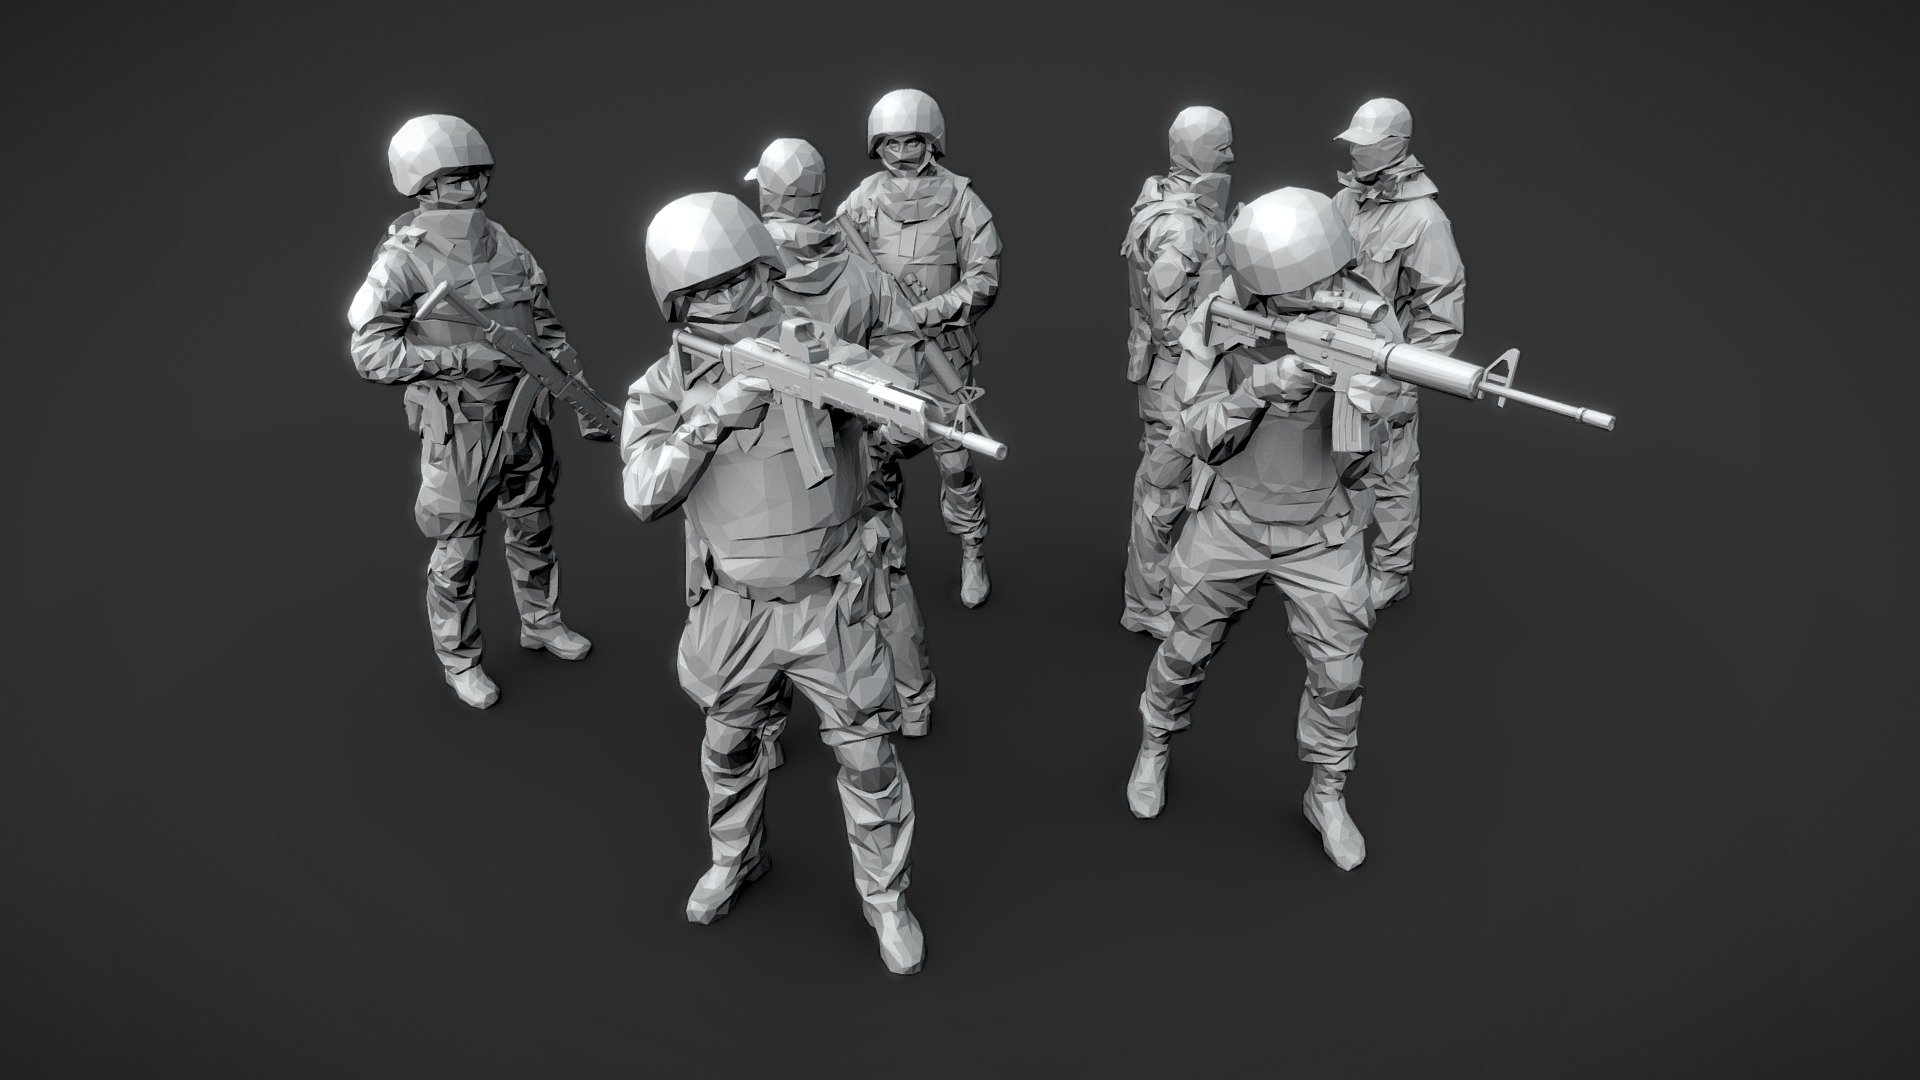 Follow us on instagram 👍🏻

Lowpoly Special Forces Pack low-poly 3d model ready for Virtual Reality (VR), Augmented Reality (AR), games and other real-time apps.

Contains 7 lowpoly special forces characters models. 6000-6500 polygons per model.

Suitable for the architectural visualization and another graphical projects 3d model